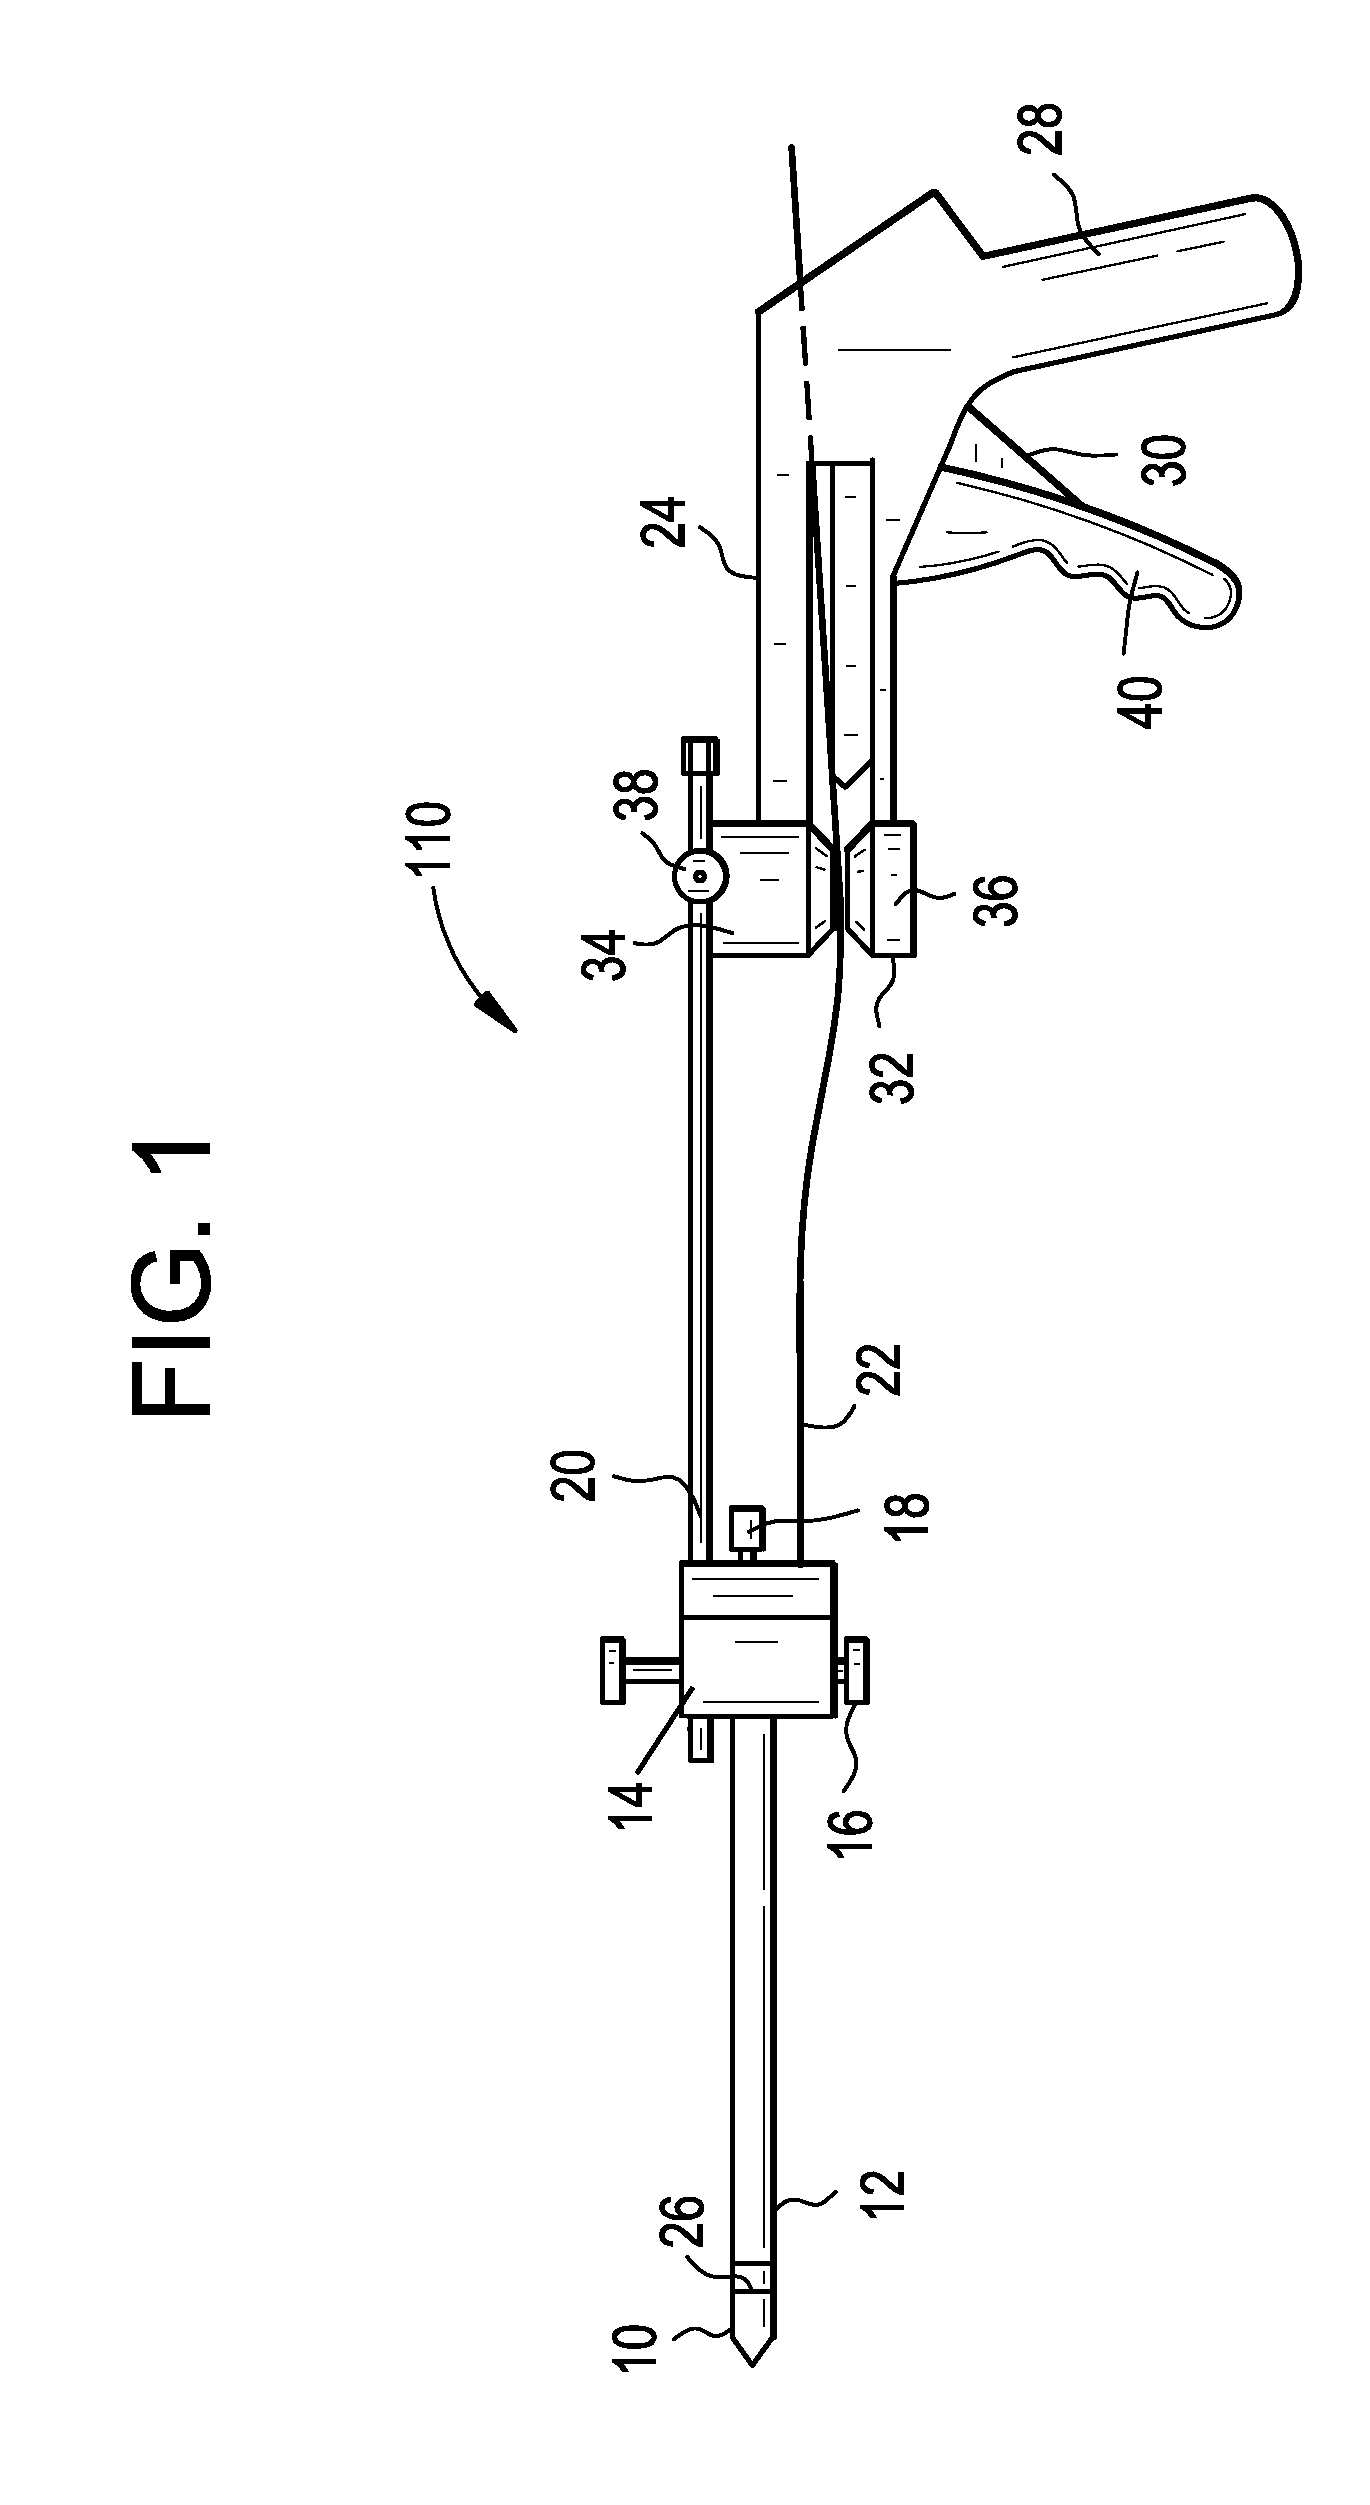 Retrieval and repositioning system for prosthetic heart valve